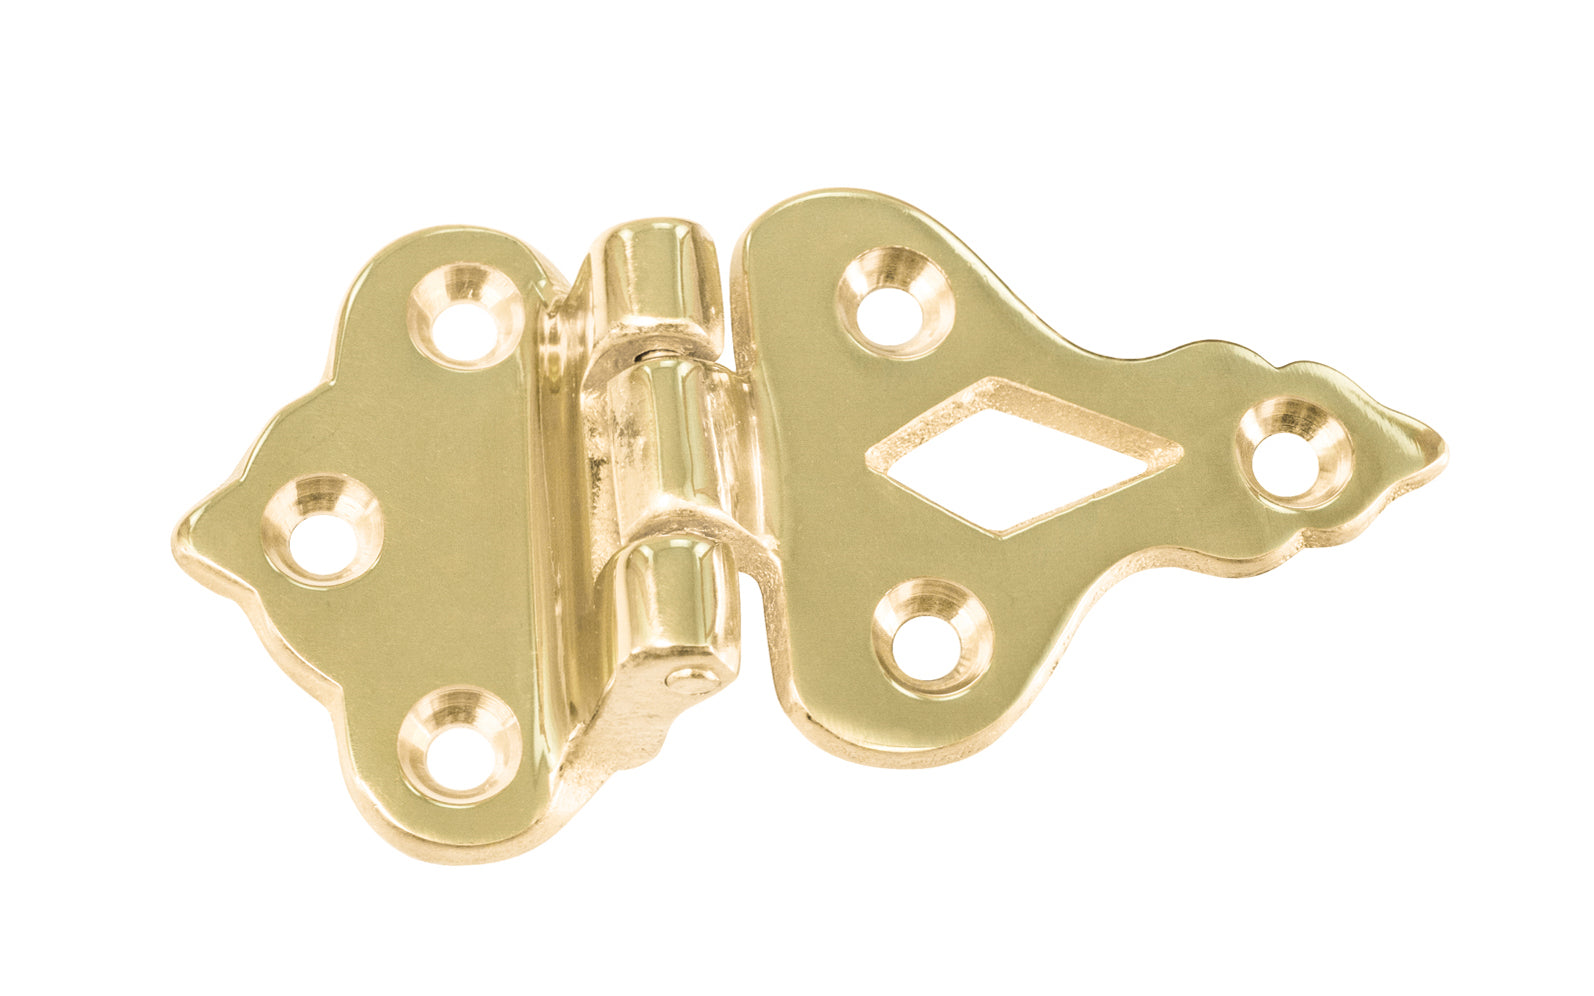 Classic & traditional solid brass ice box hinge. The hinge has a fixed pin for sturdy operation, & the hinge has a 3/8" offset, which is common for many icebox cabinets. Hinges originally designed for traditional ice boxes & refrigerators. Lacquered Brass Finish.